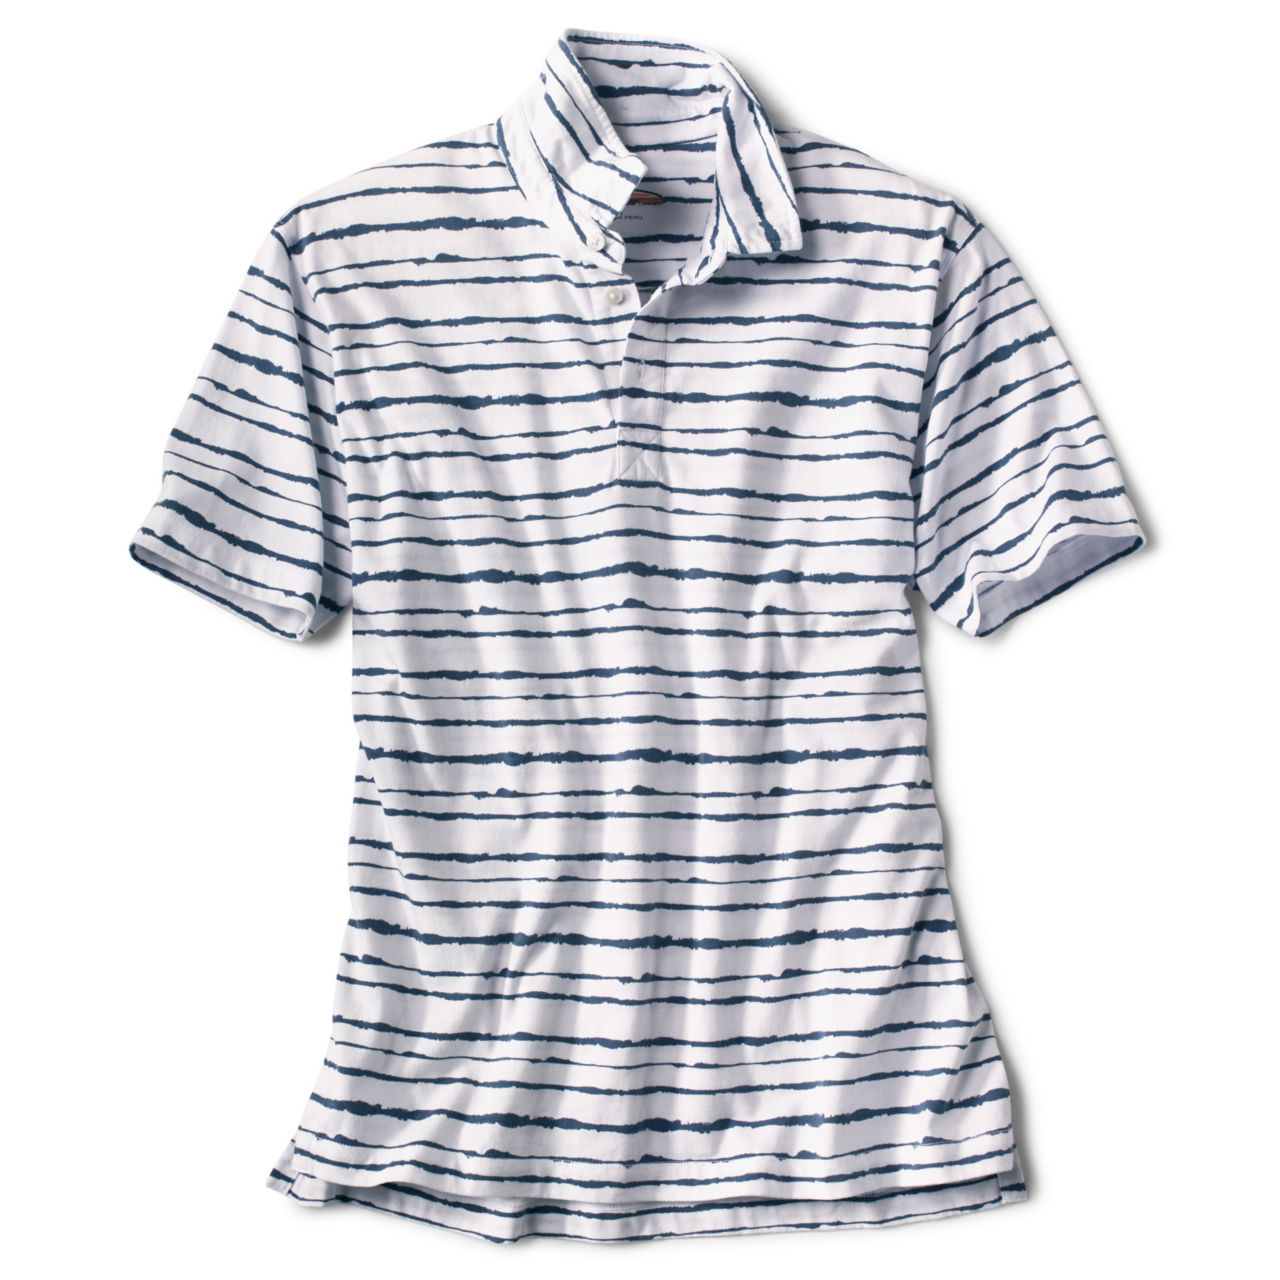 Longboat Printed Polo - WHITE/BLUE STRIPE image number 0